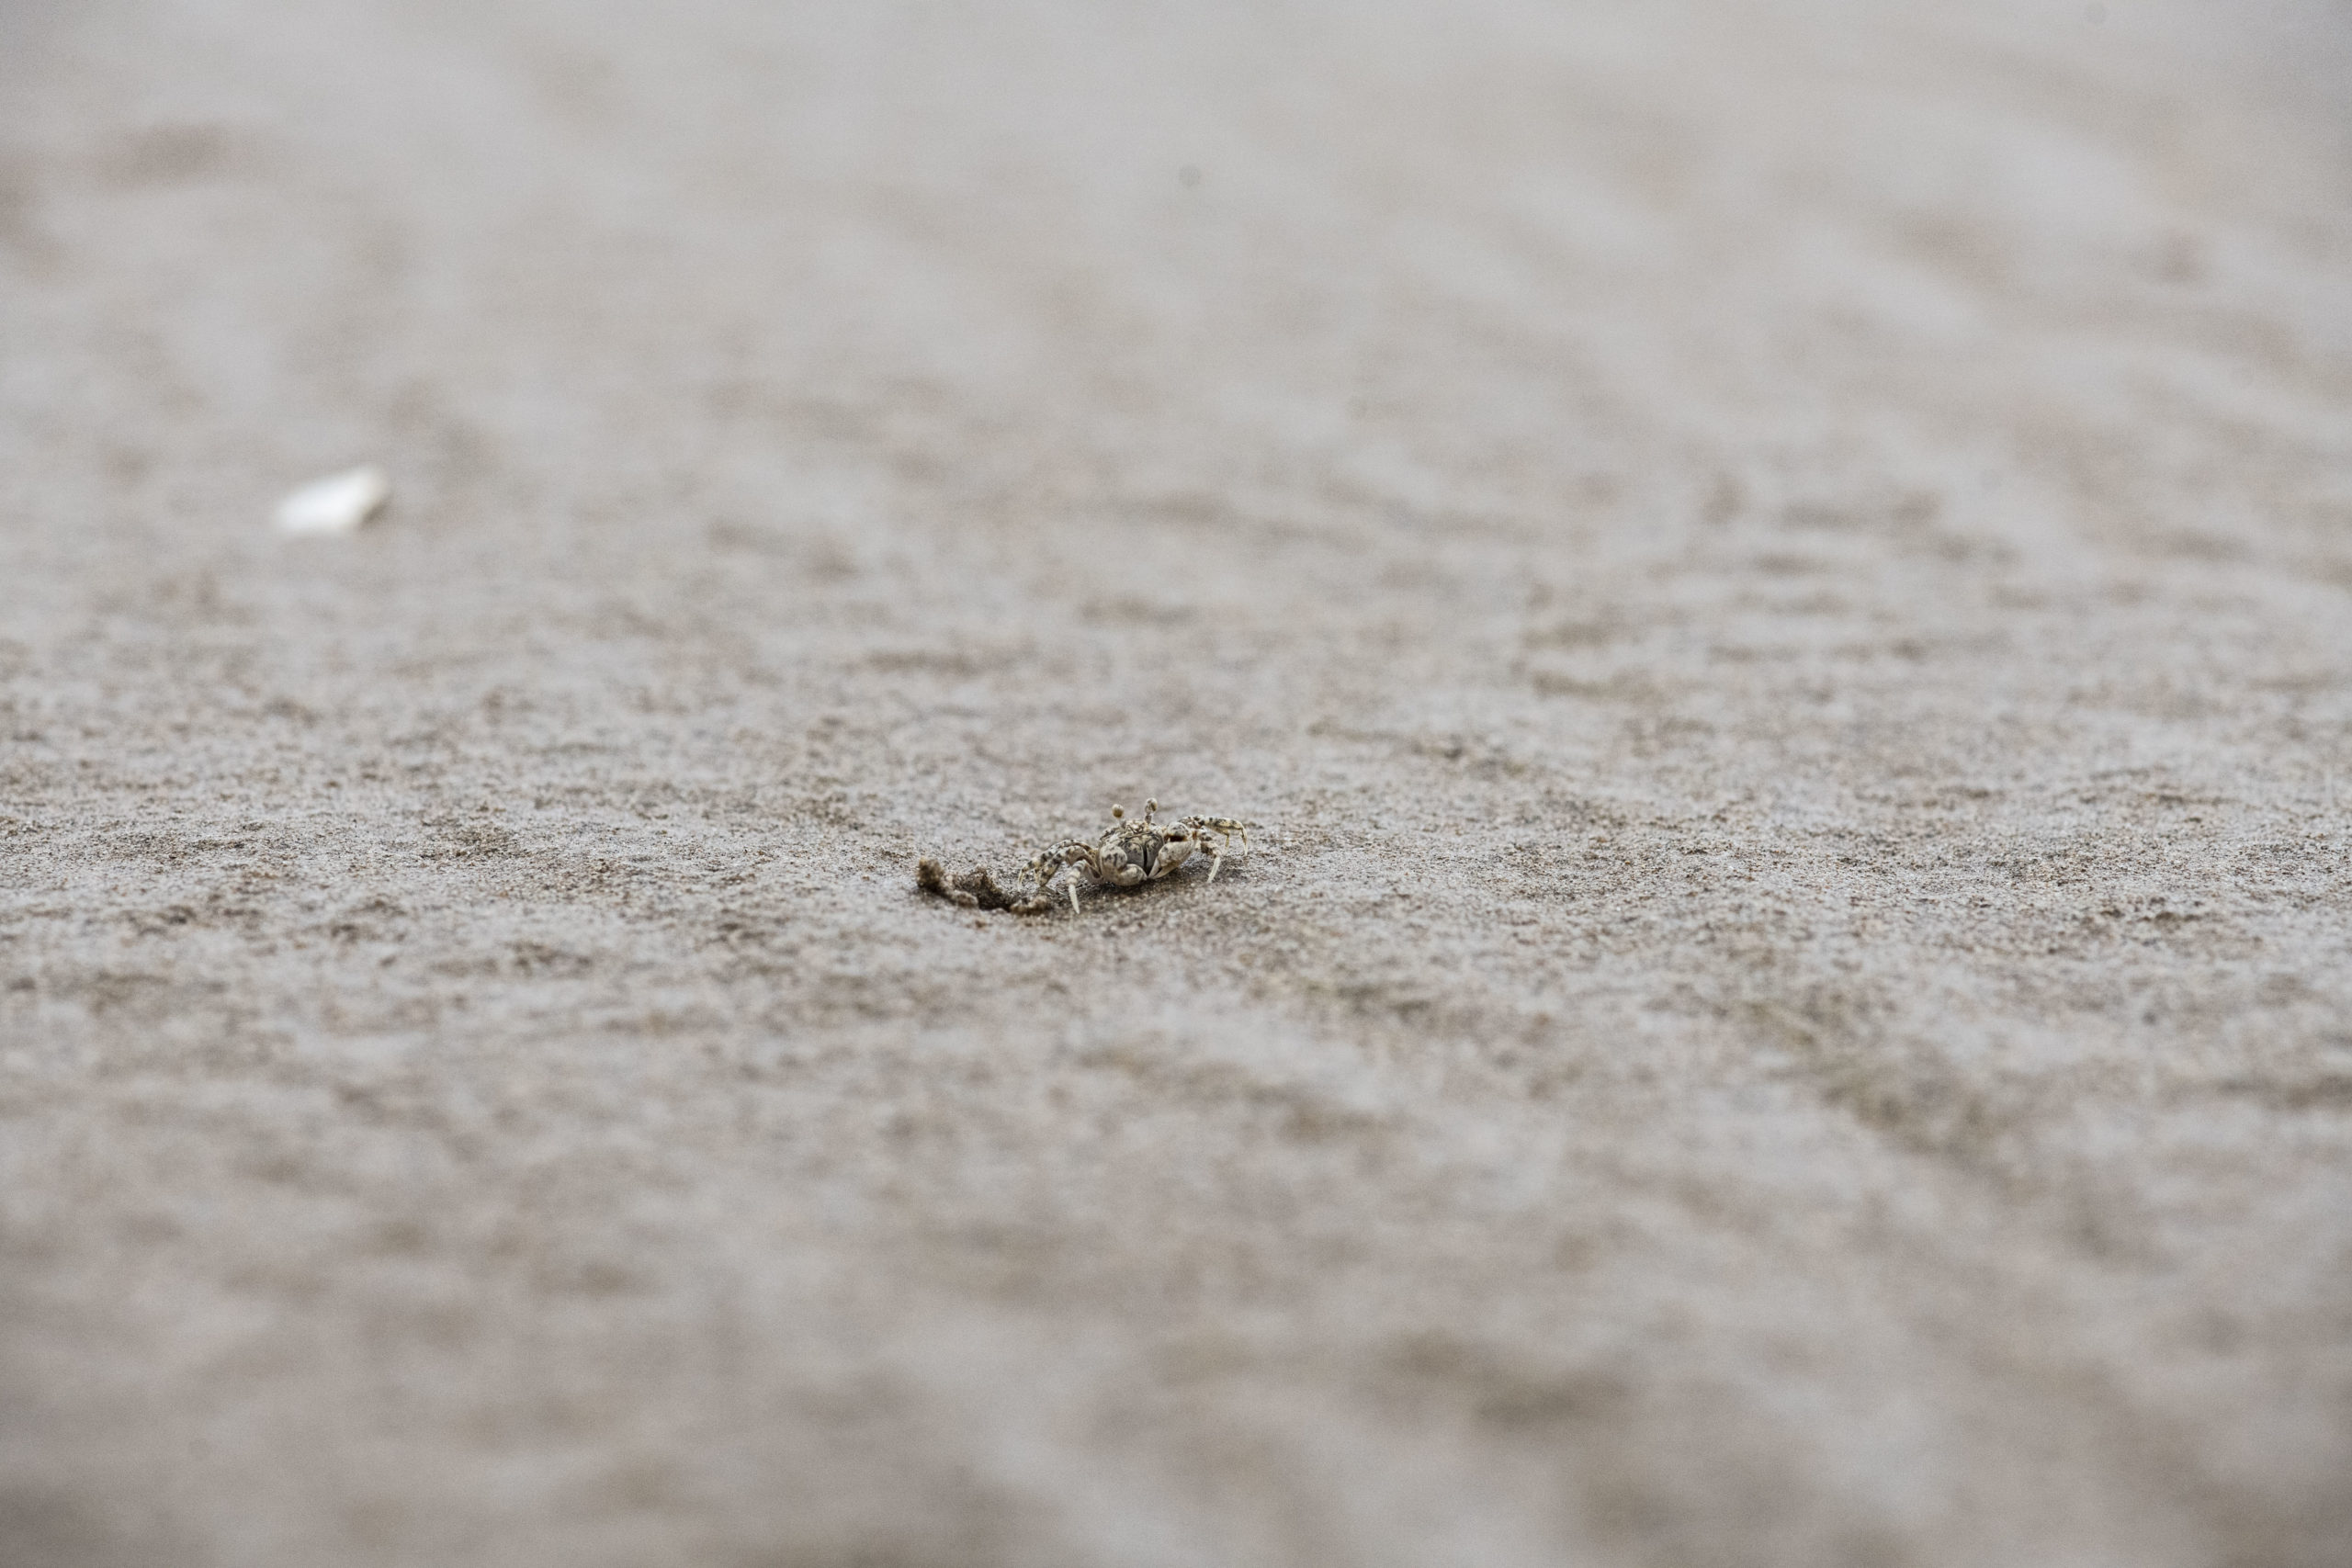 Photo shoes a crab on sand next to its burrow.